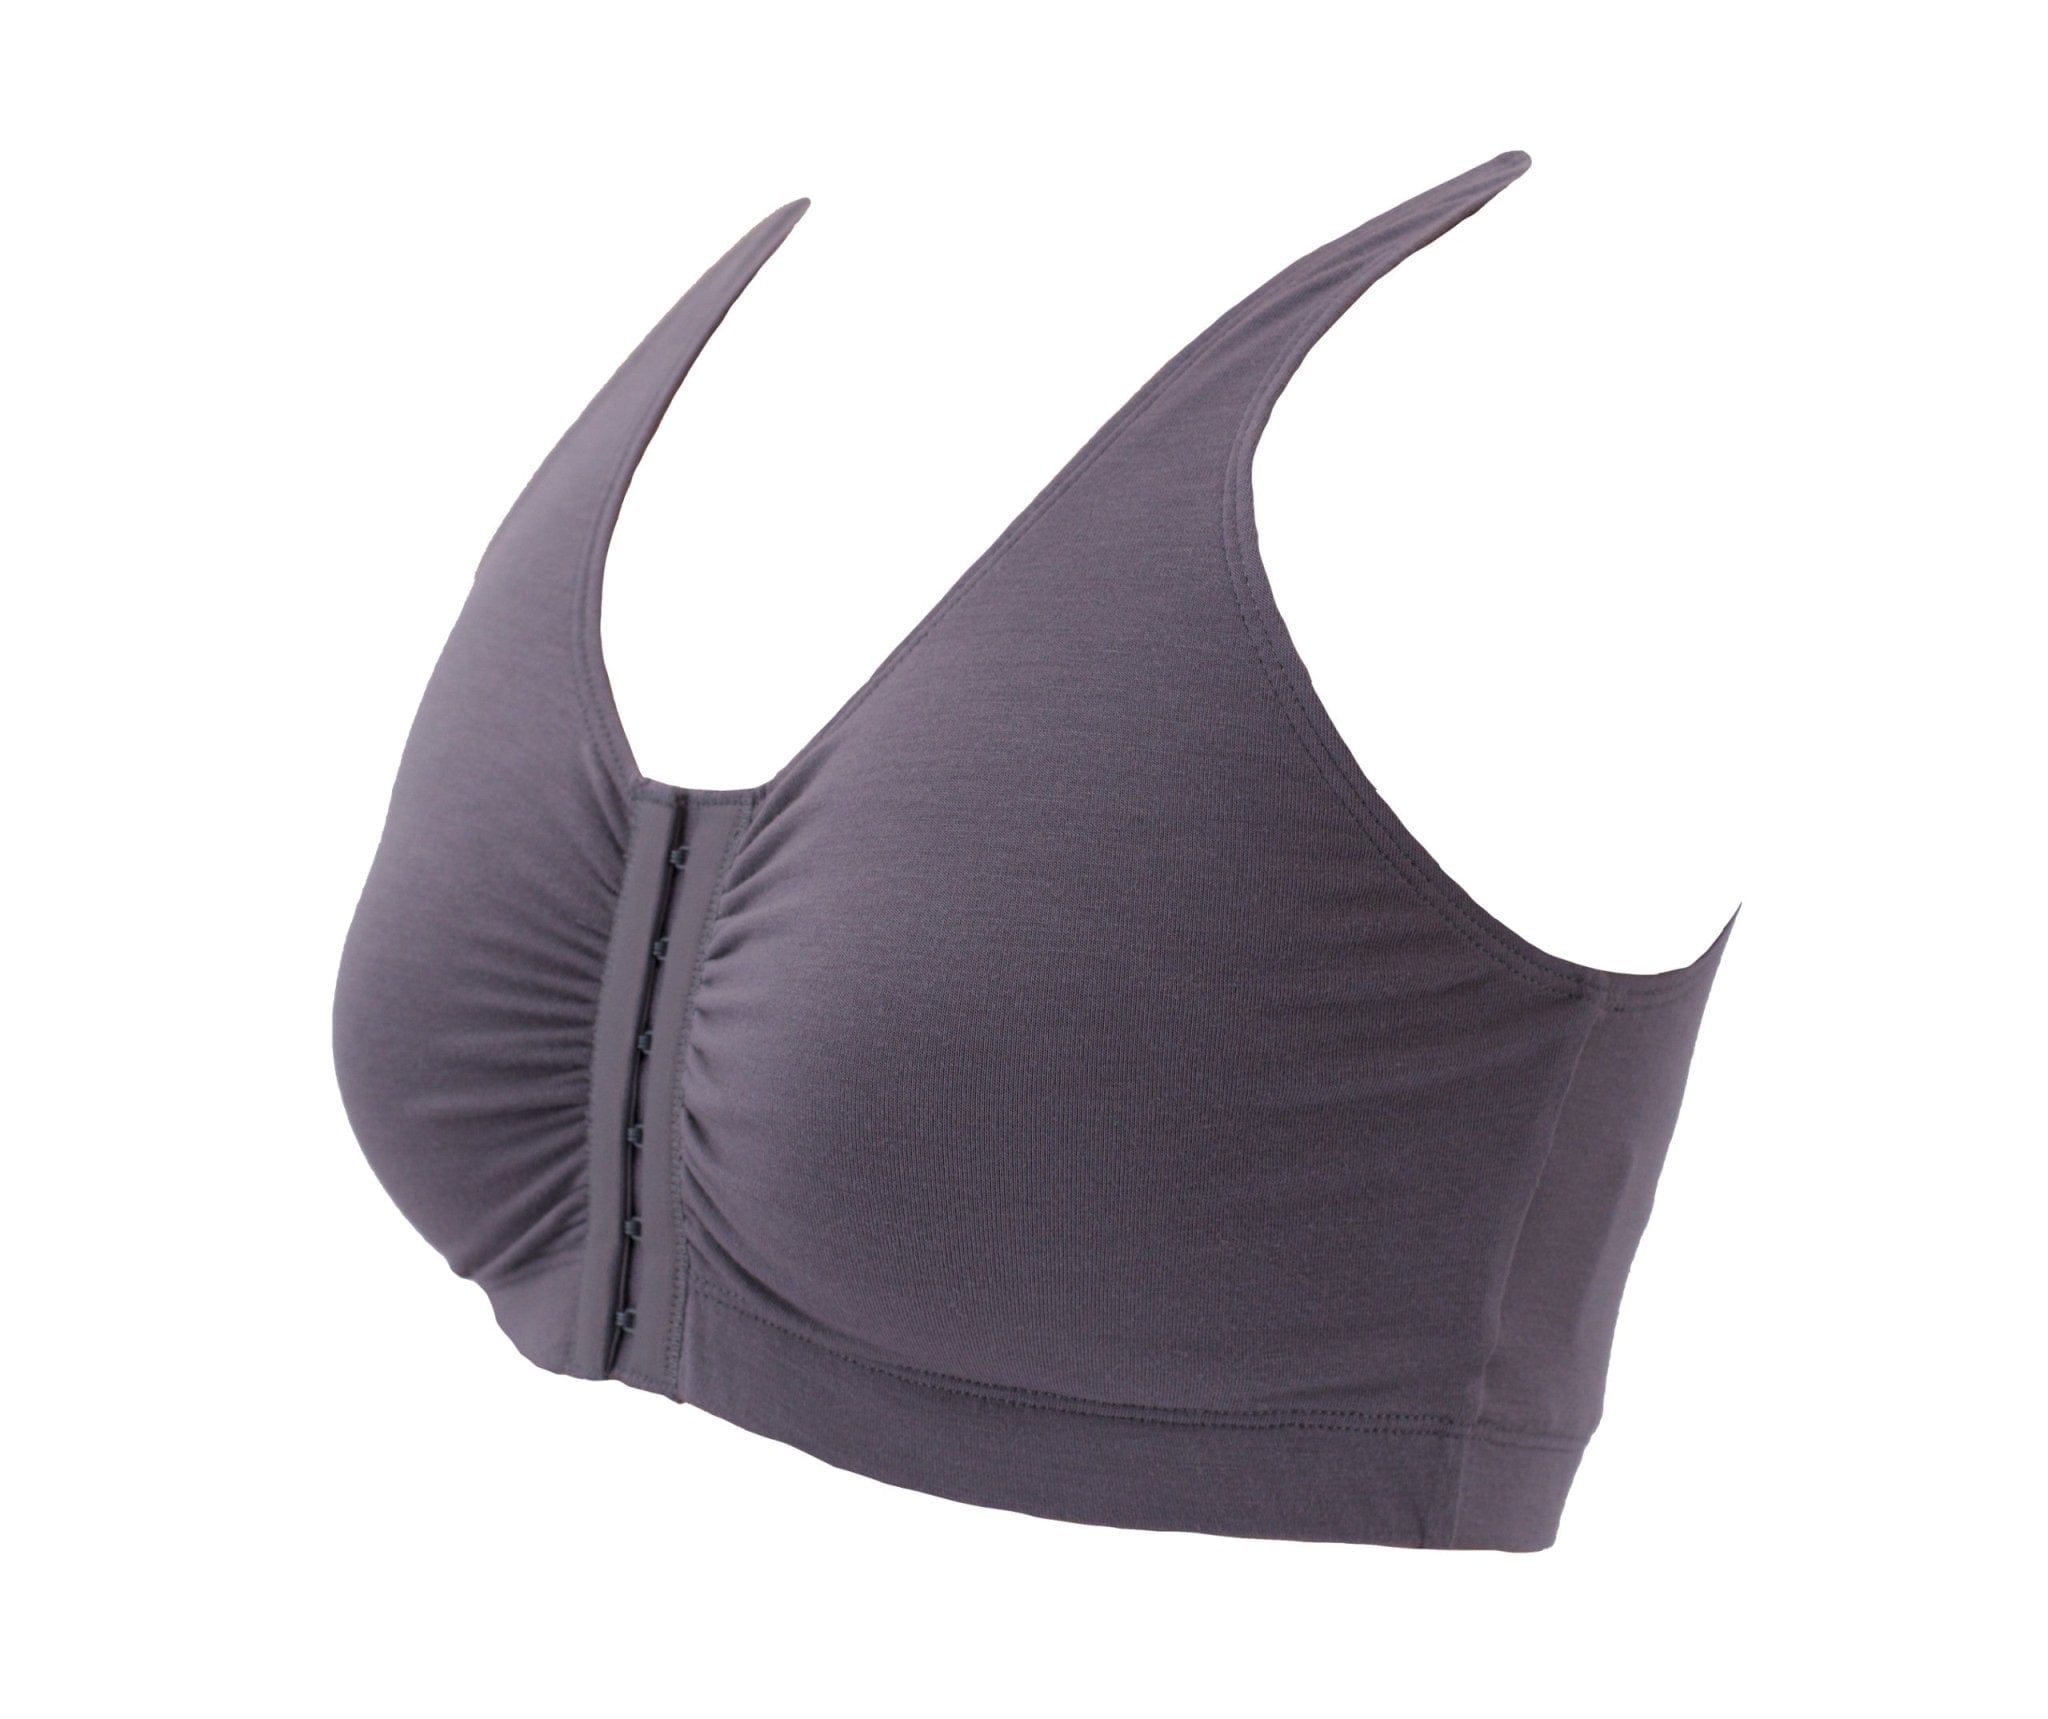 Wholesale medical posture bras For Supportive Underwear 